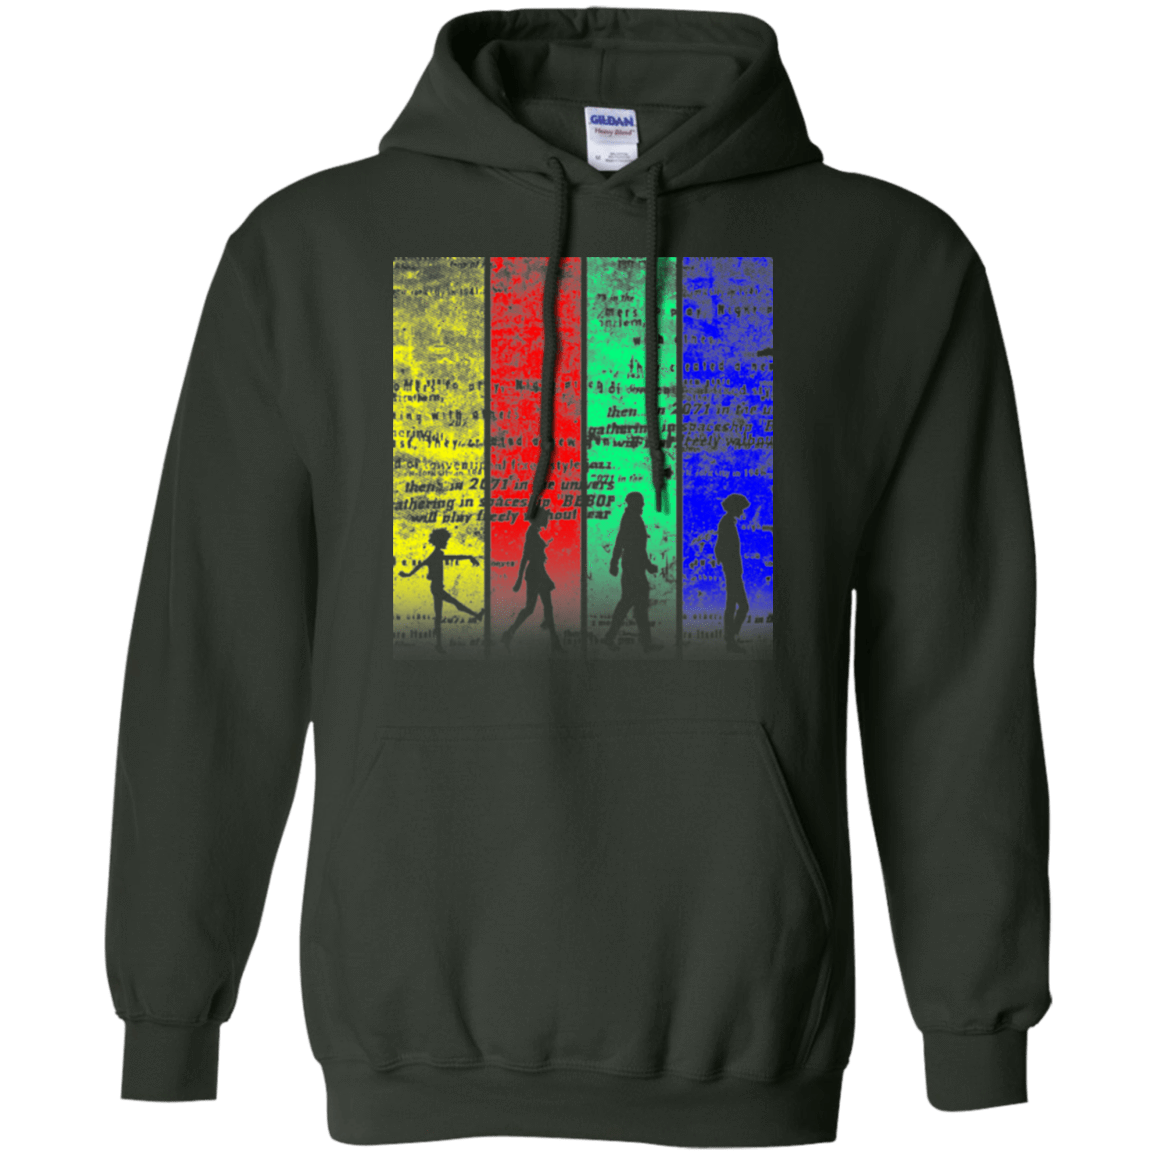 Sweatshirts Forest Green / Small Lets jam Pullover Hoodie